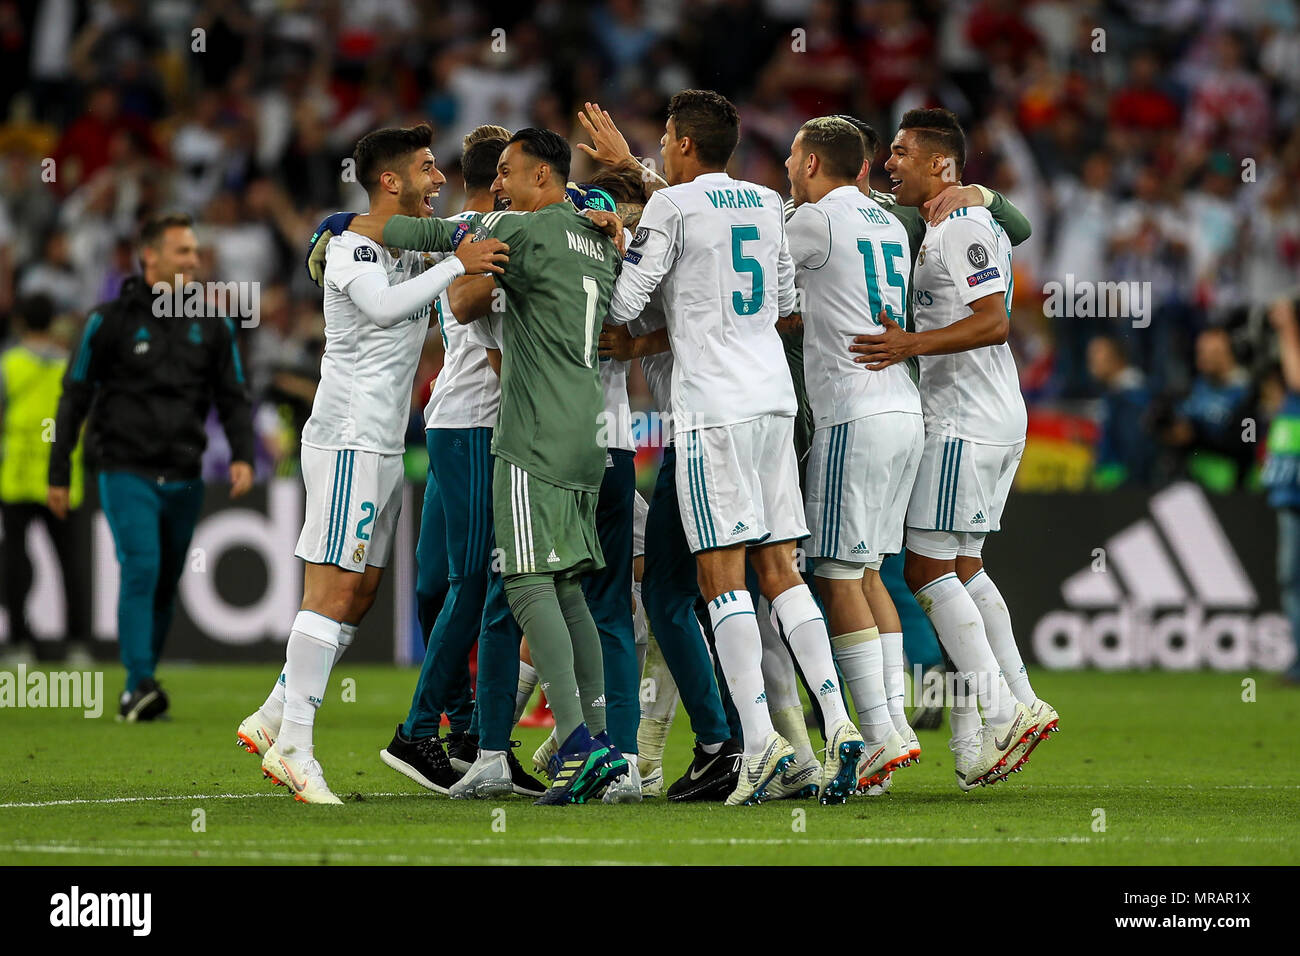 Kiev Olympic Stadium, Kiev, Ukraine. 26th May, 2018. UEFA Champions League  Final, Real Madrid versus Liverpool; Real Madrid players celebrate after  the whistle blows for full time as they have won 3-1